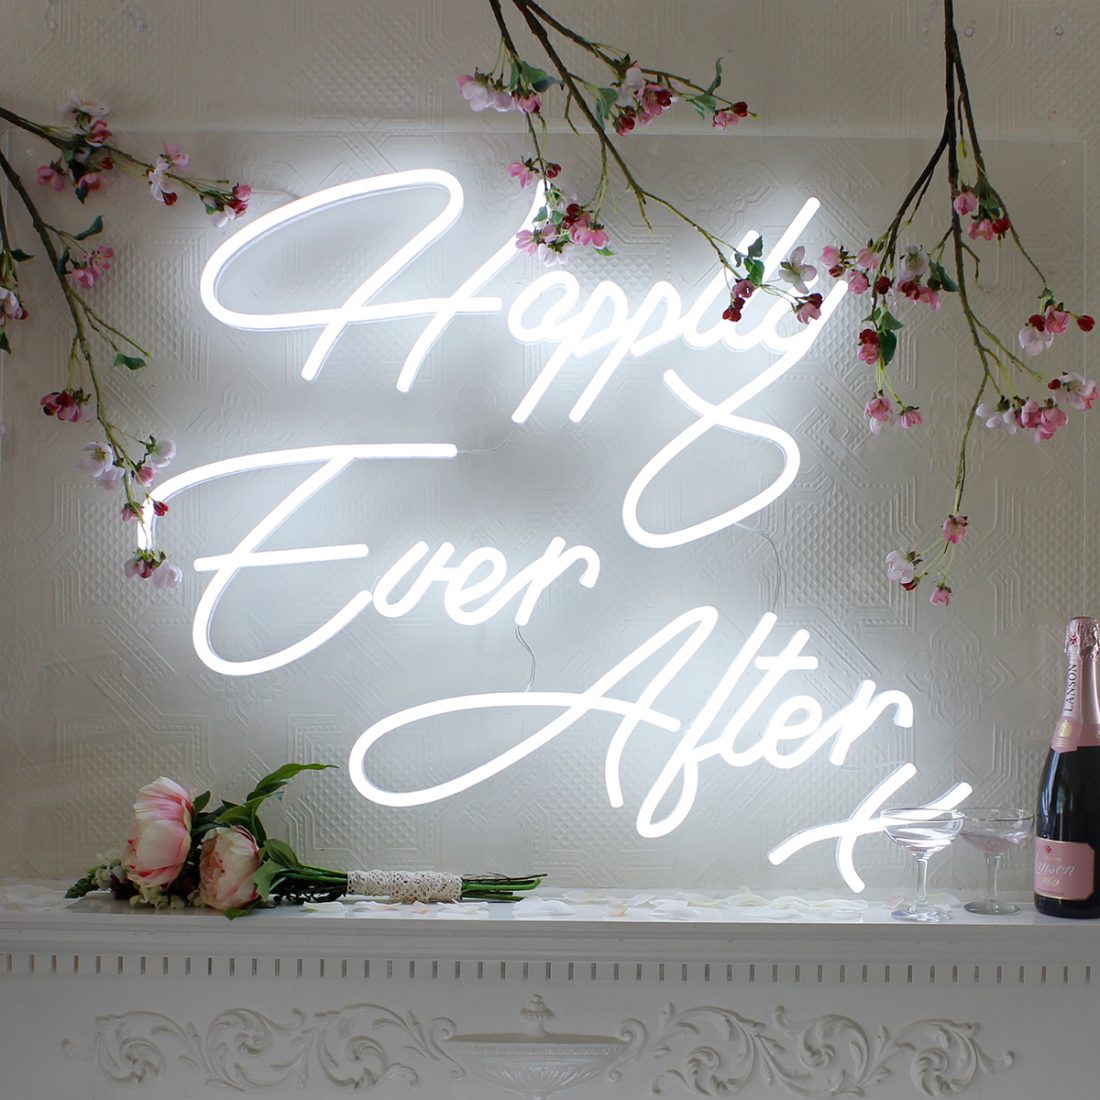 Happily Ever After Wedding Sign